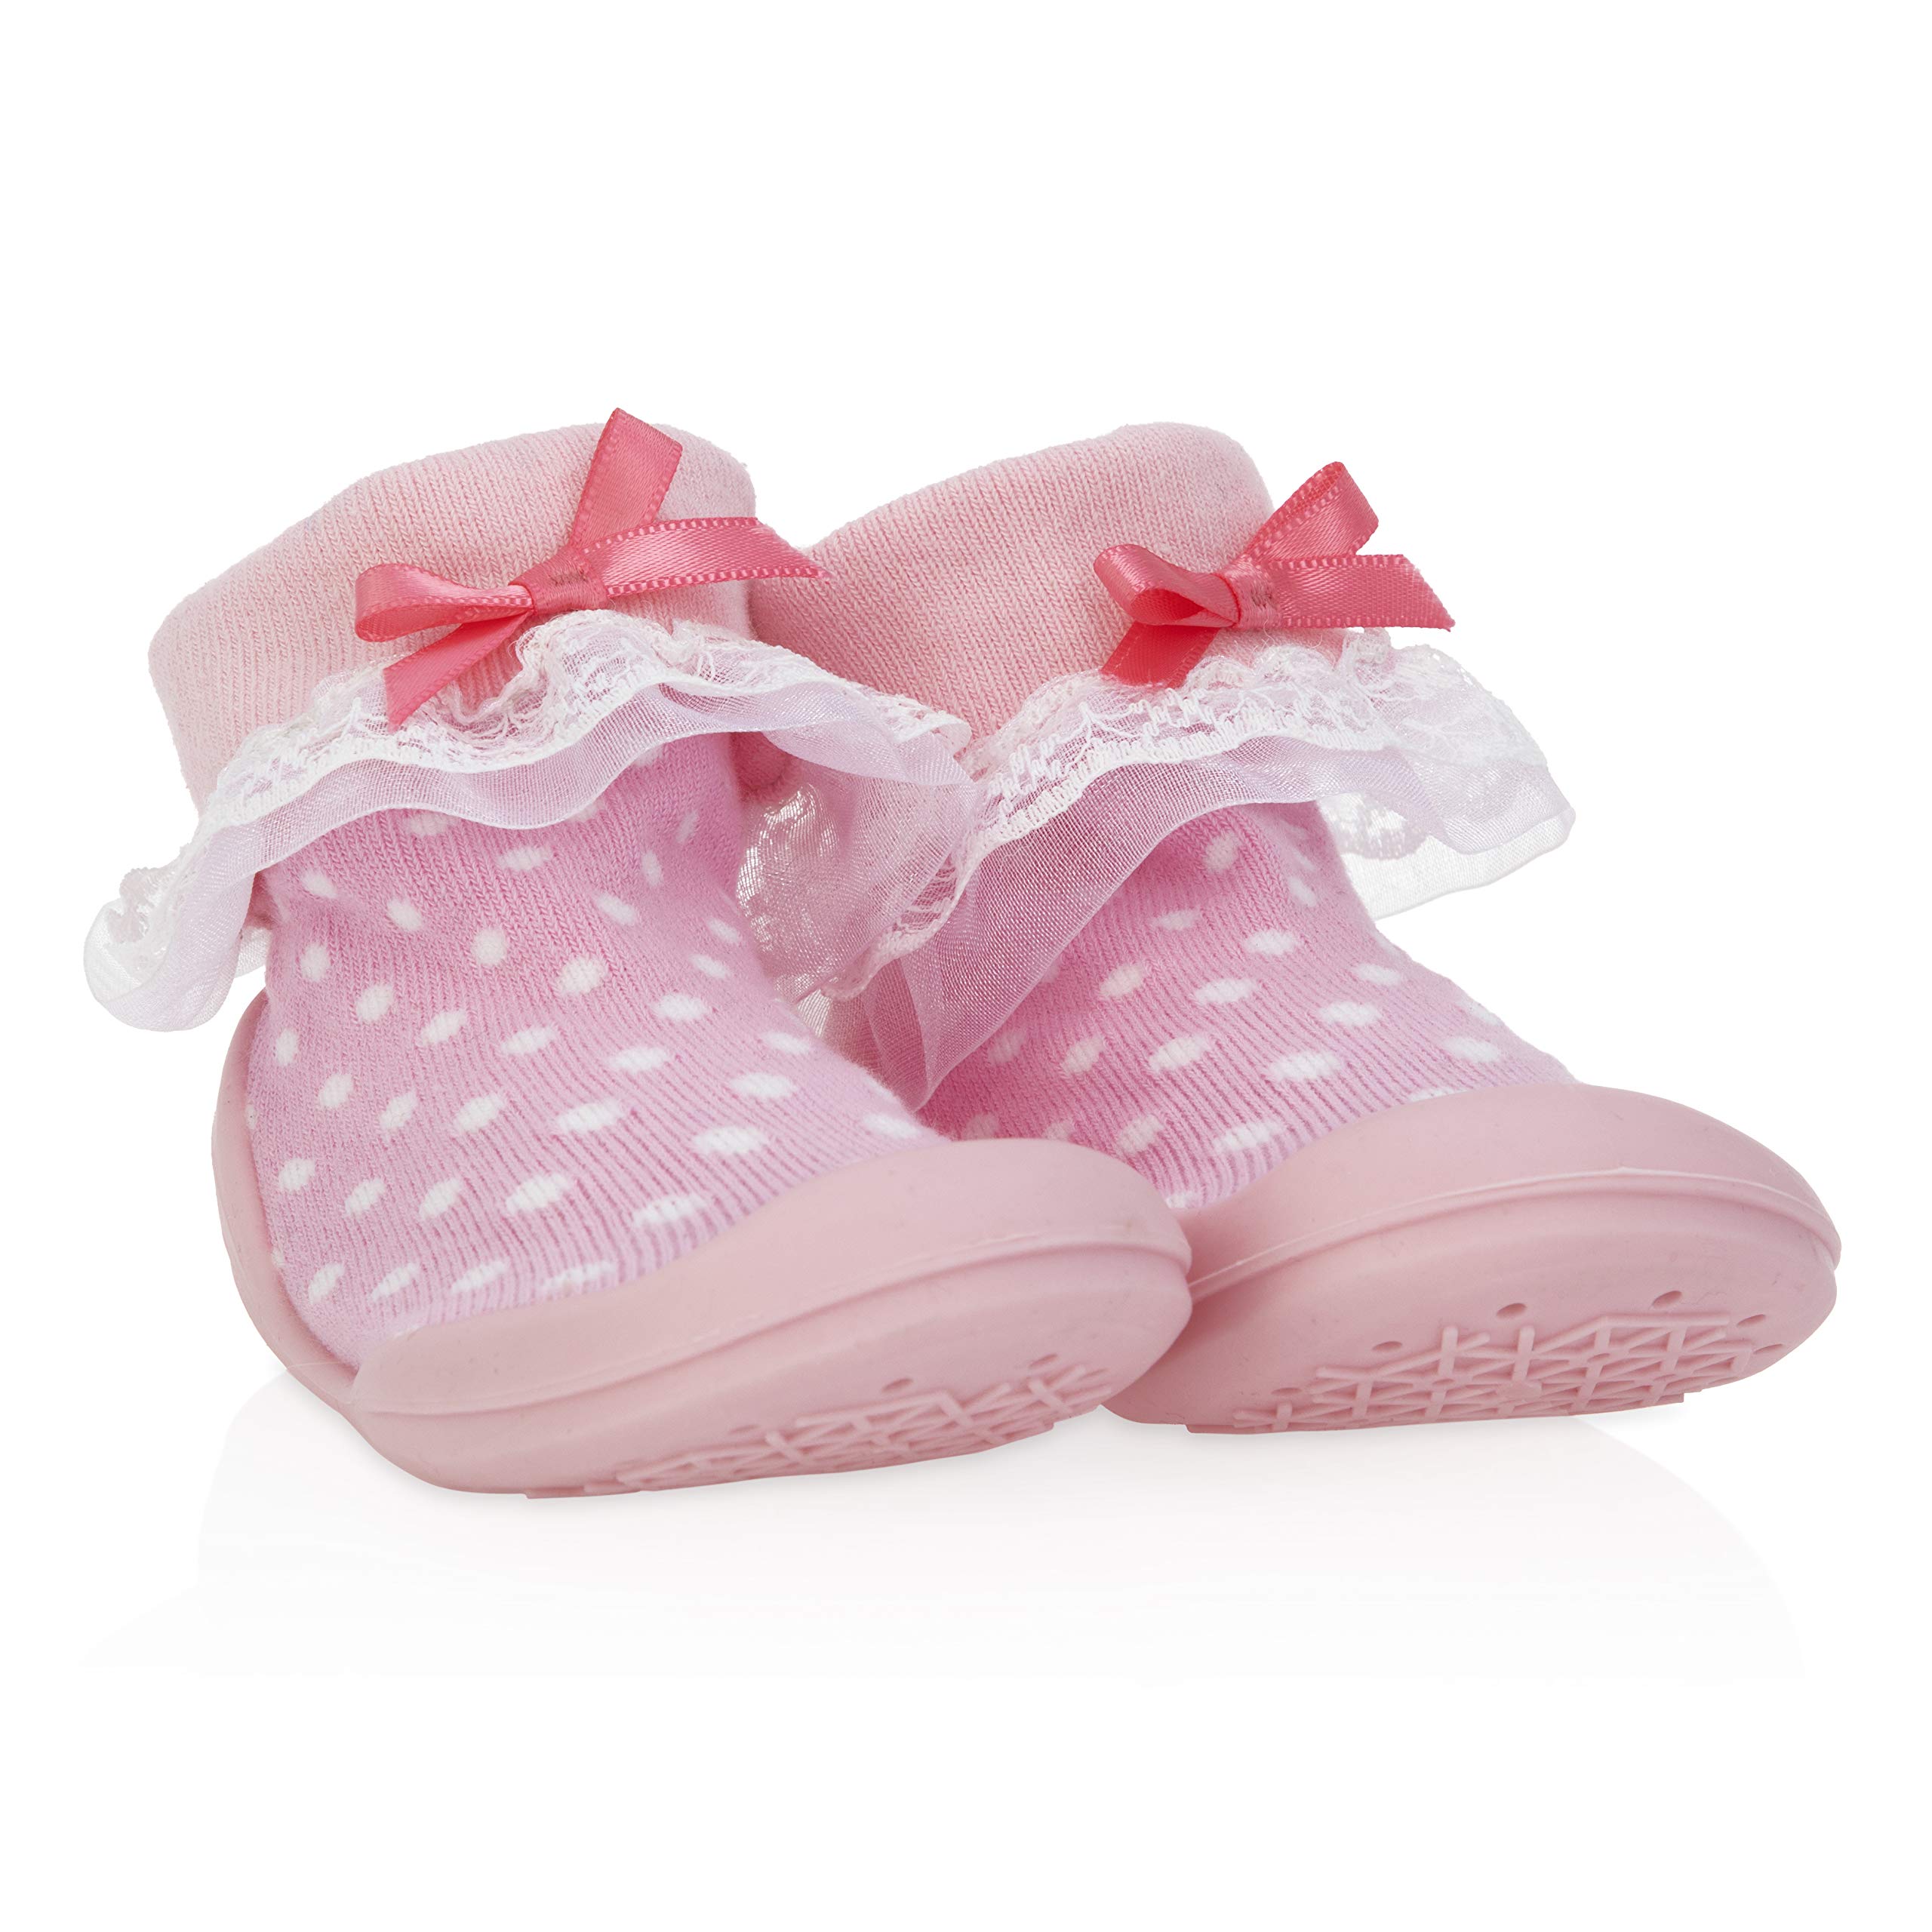 Nuby Snekz Comfortable Rubber Sole Sock Shoes for First Steps- Pink Polka Dots/Large 22-30 Months